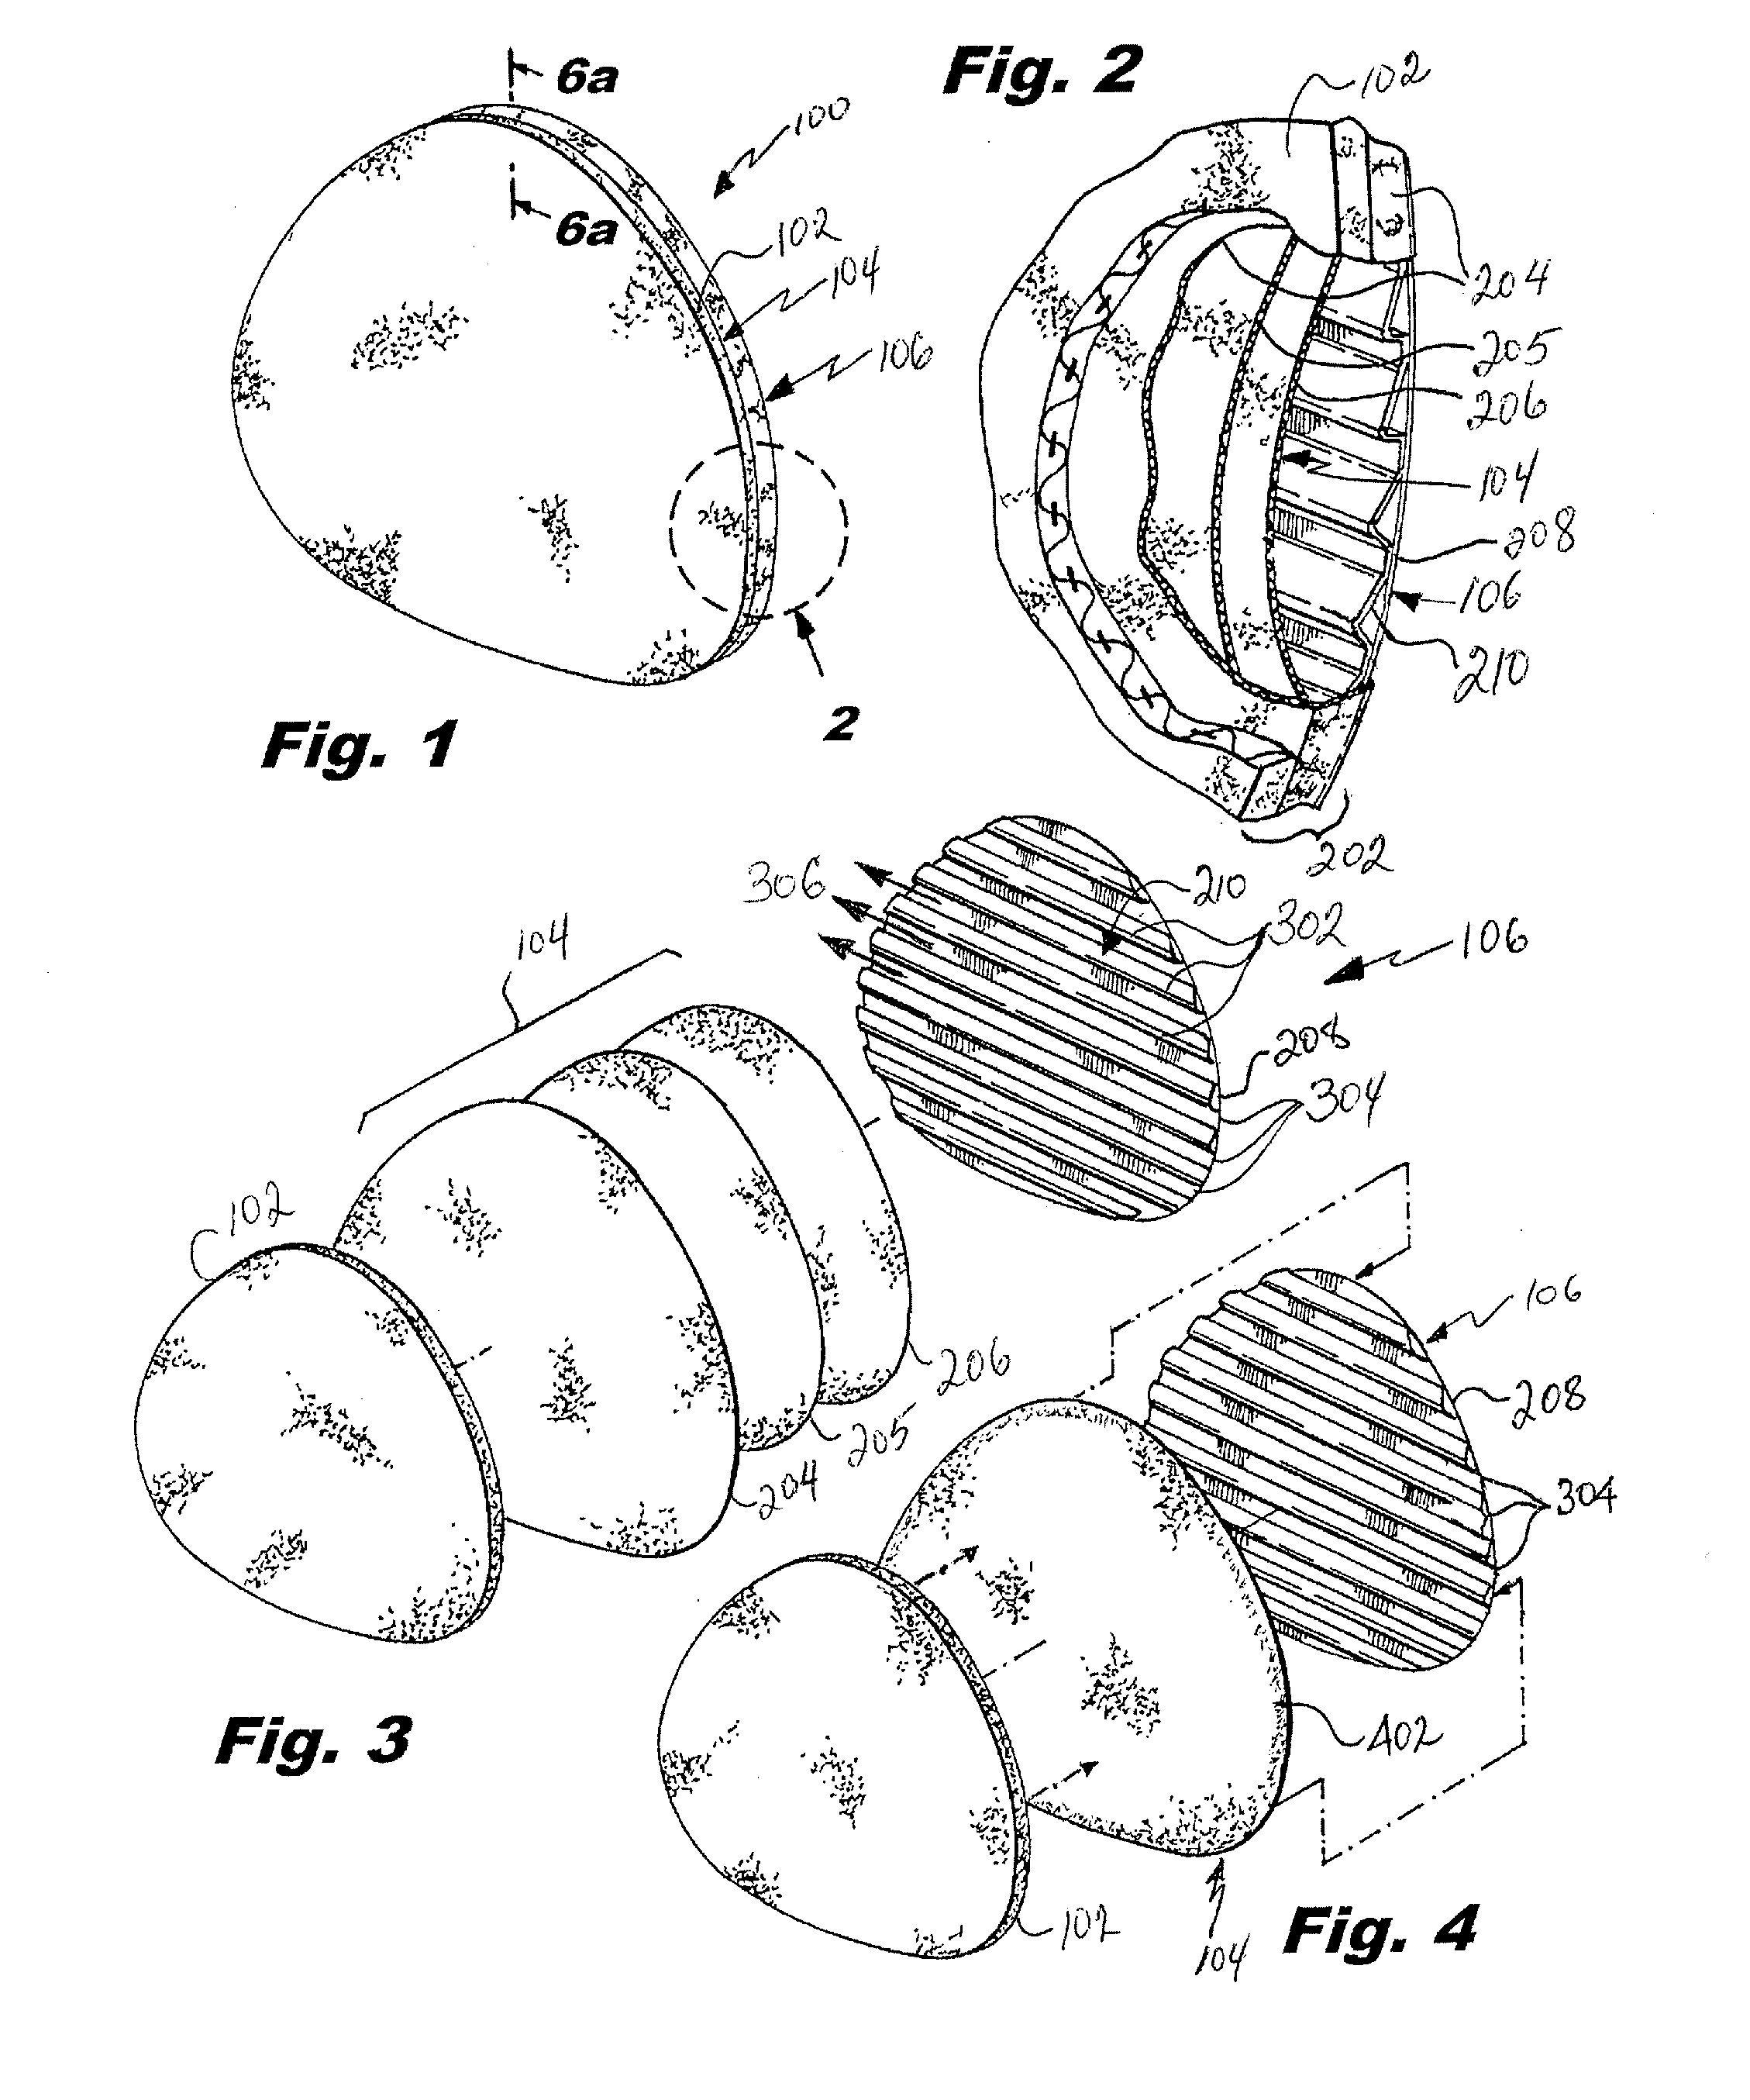 Apparatus with Exhaust Spacer to Improve Filtration of Pathogens in Respiratory Emissions of Sneezes